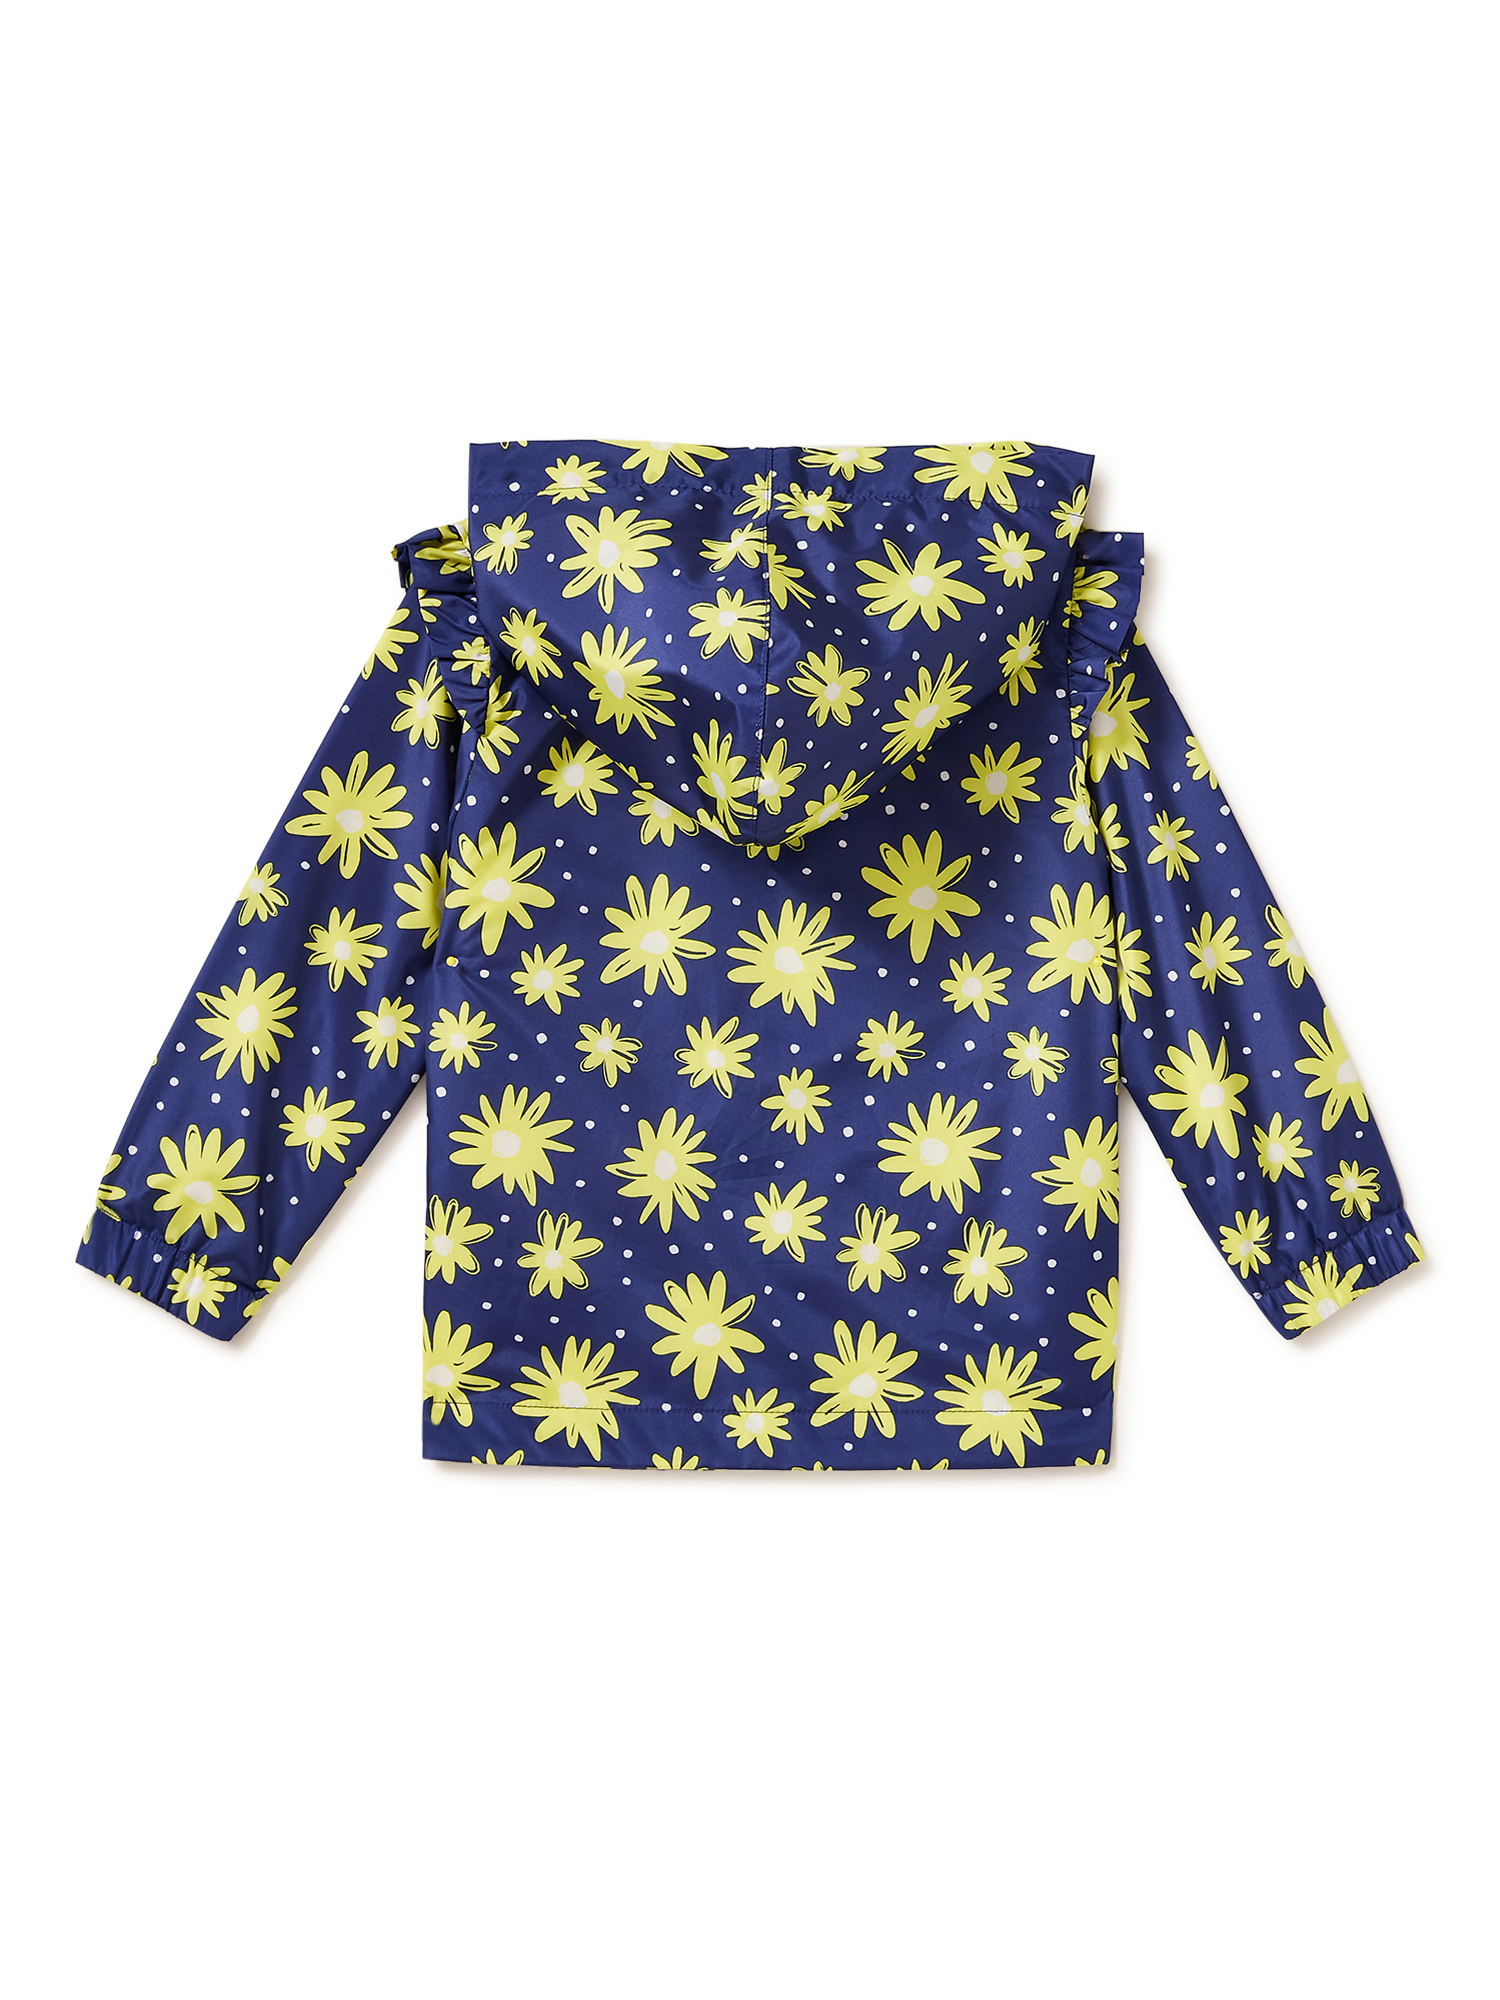 Wonder Nation Long Sleeve Relaxed Fit Printed Jacket (Infant or Toddler) 1 Pack - image 3 of 4